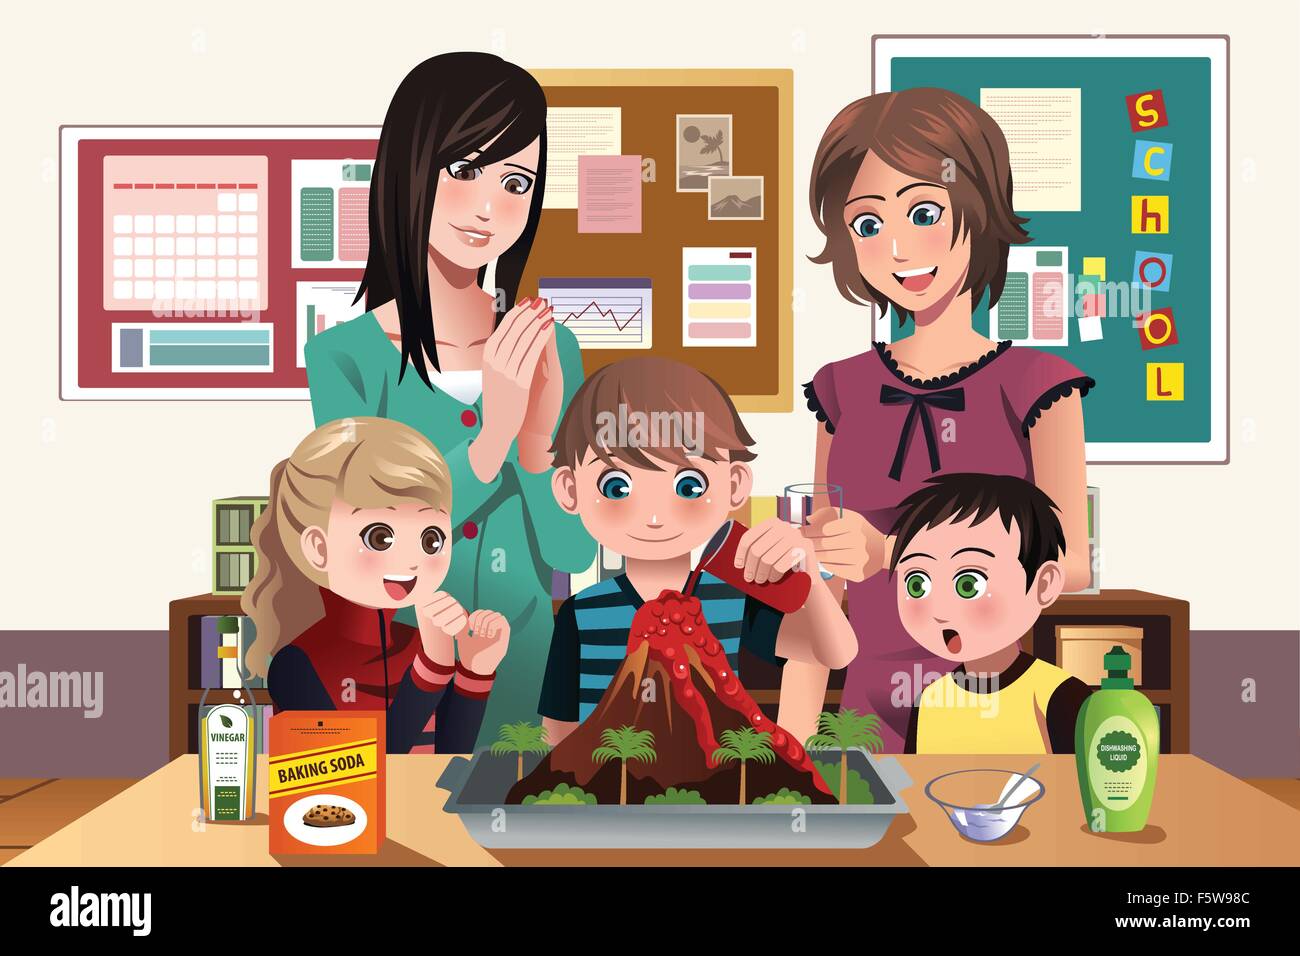 A vector illustration of elementary students doing a volcano experiment at school Stock Vector